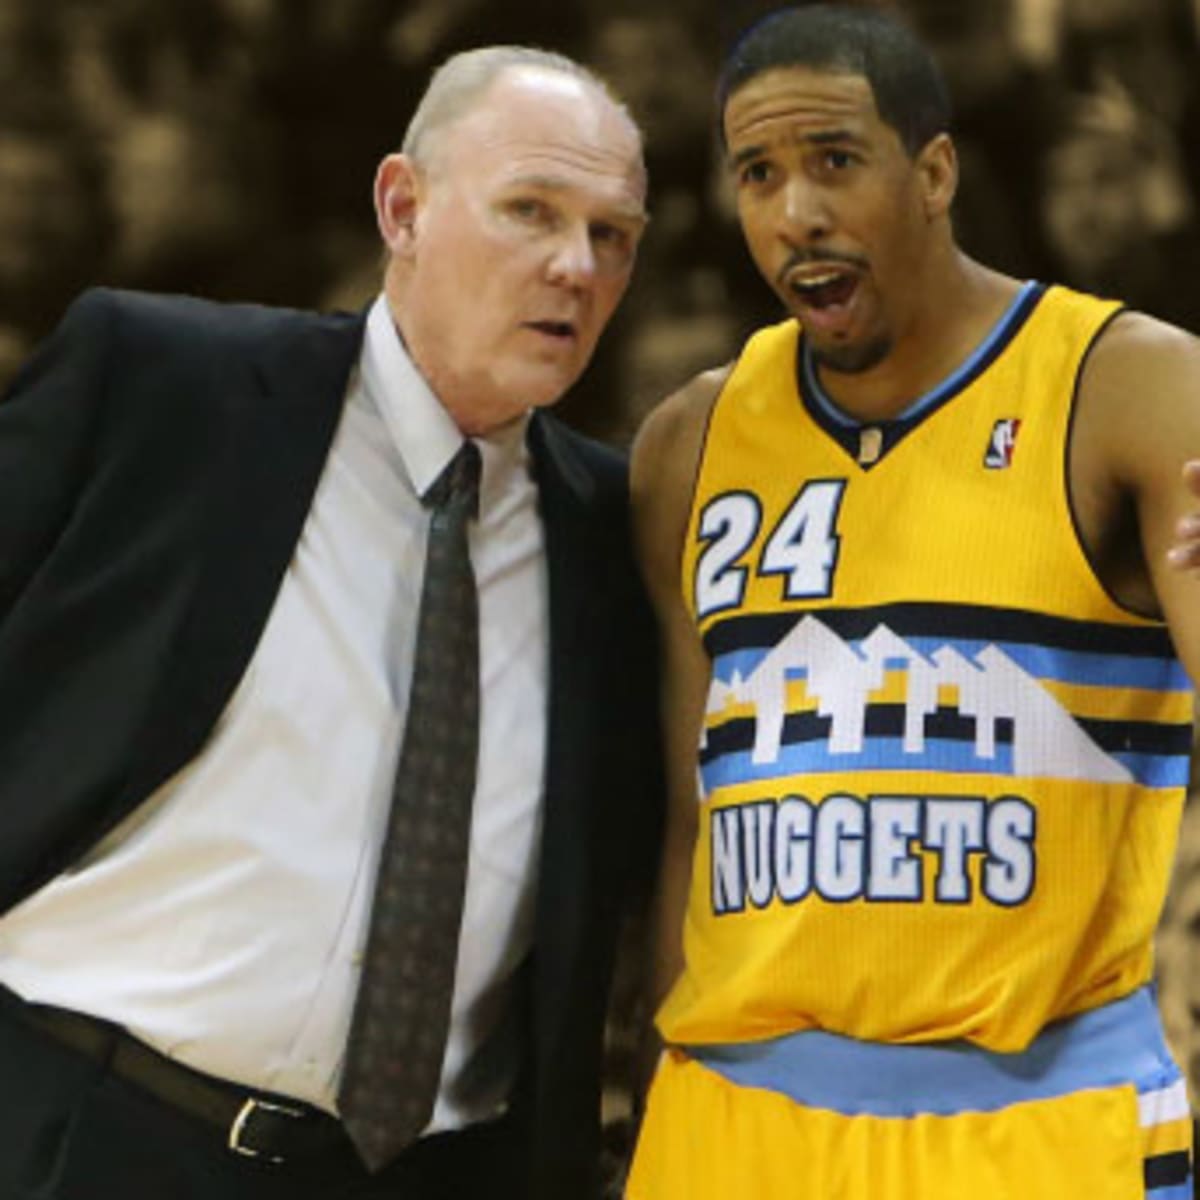 NBA trade rumors: Nuggets' Andre Miller may be moved, according to report 